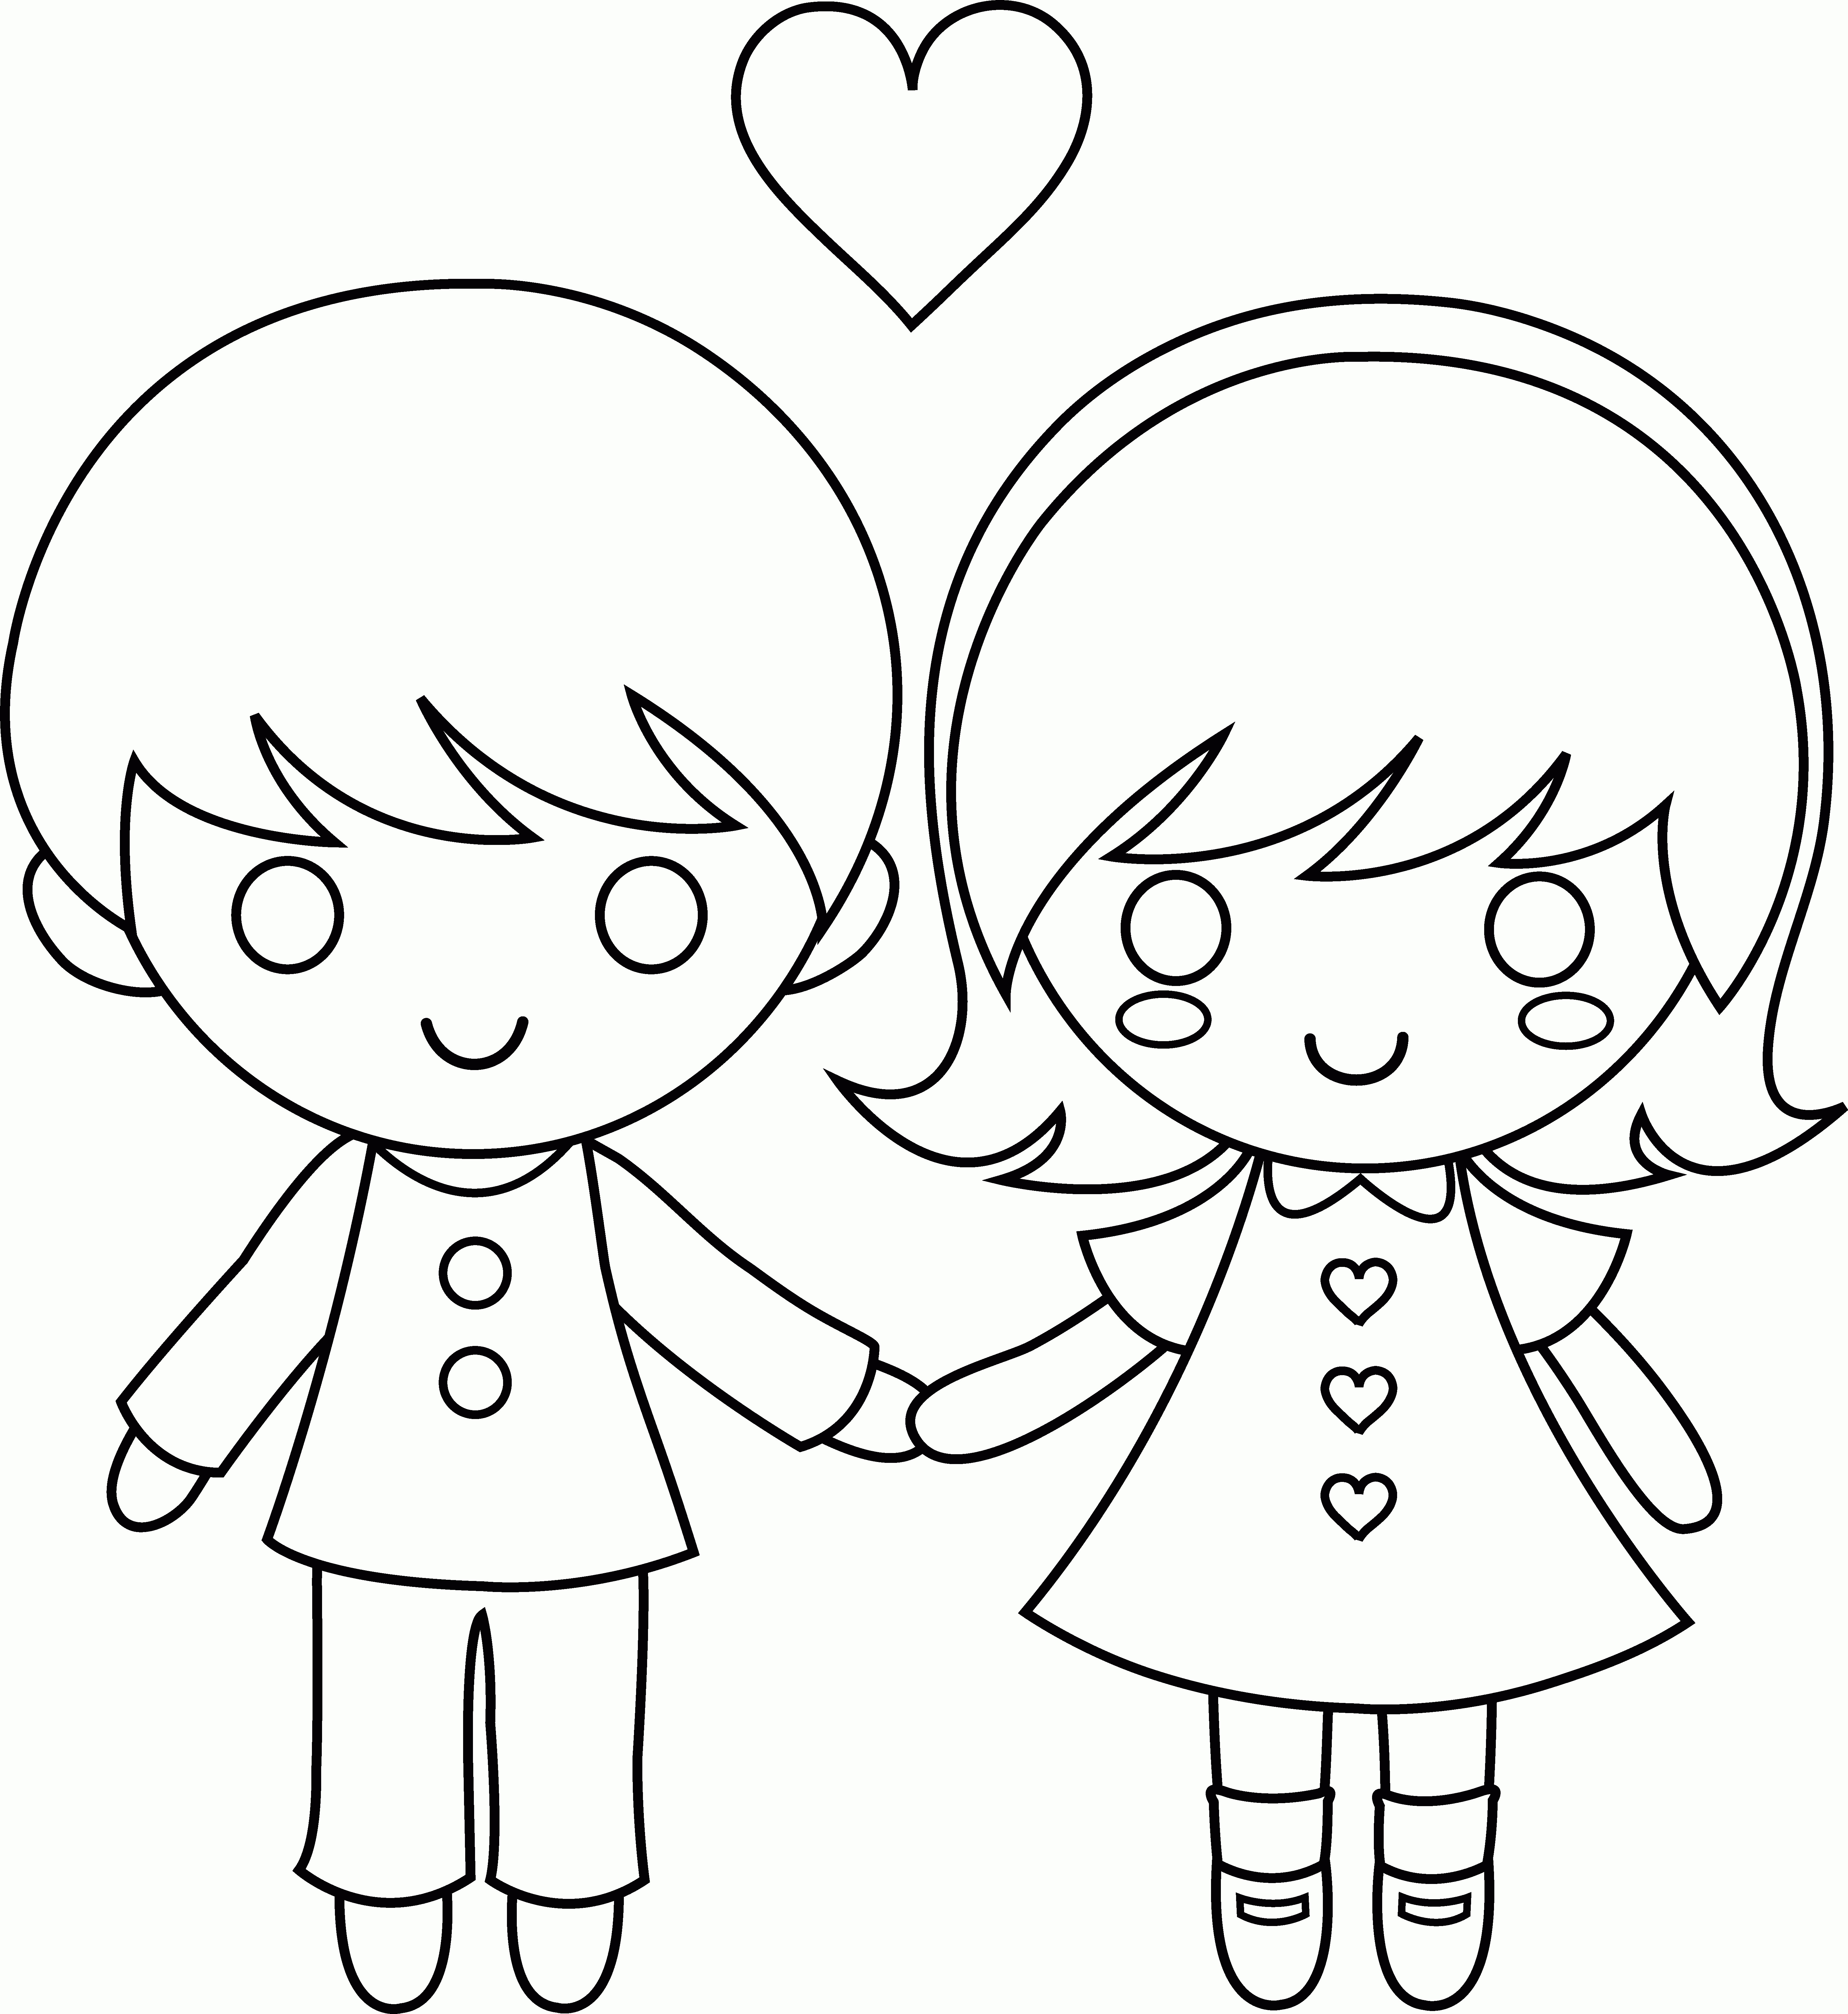 Coloring Sheets For Girls And Boys
 Coloring Page Boy And Girl Coloring Home